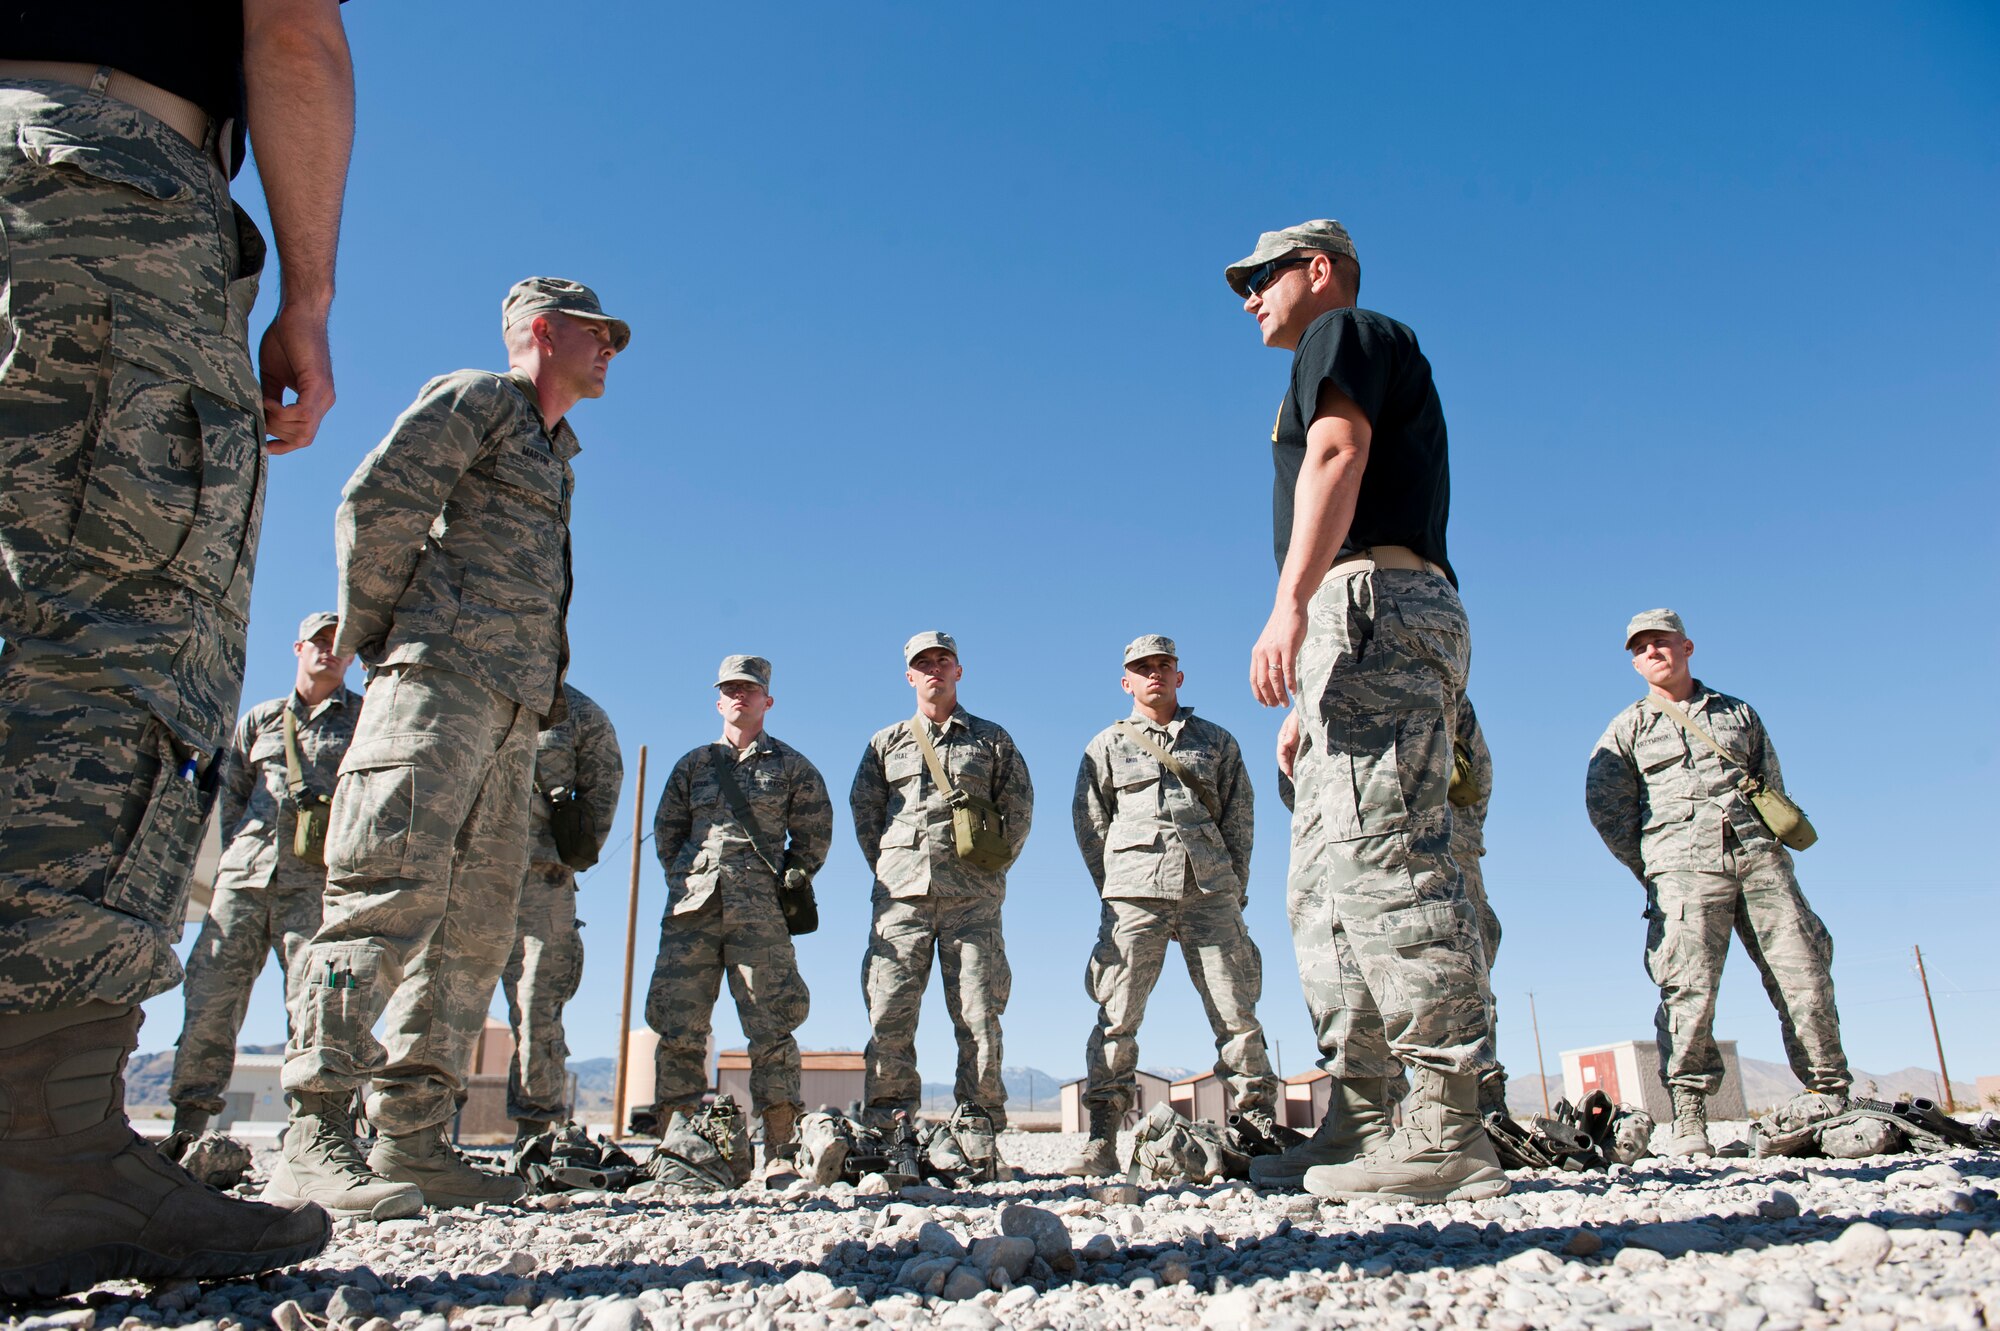 A Ranger Assessment Course instructor (right), informs the RAC class leader that he needs to improve his leadership skills at the Nevada Test and Training Range, Oct. 3, 2014. If the students successfully graduate from the course they may be given more opportunities to test and improve their leadership skills in even more stressful environments at the U.S. Army Ranger School. (U.S. Air Force photo by Airman 1st Class Thomas Spangler)